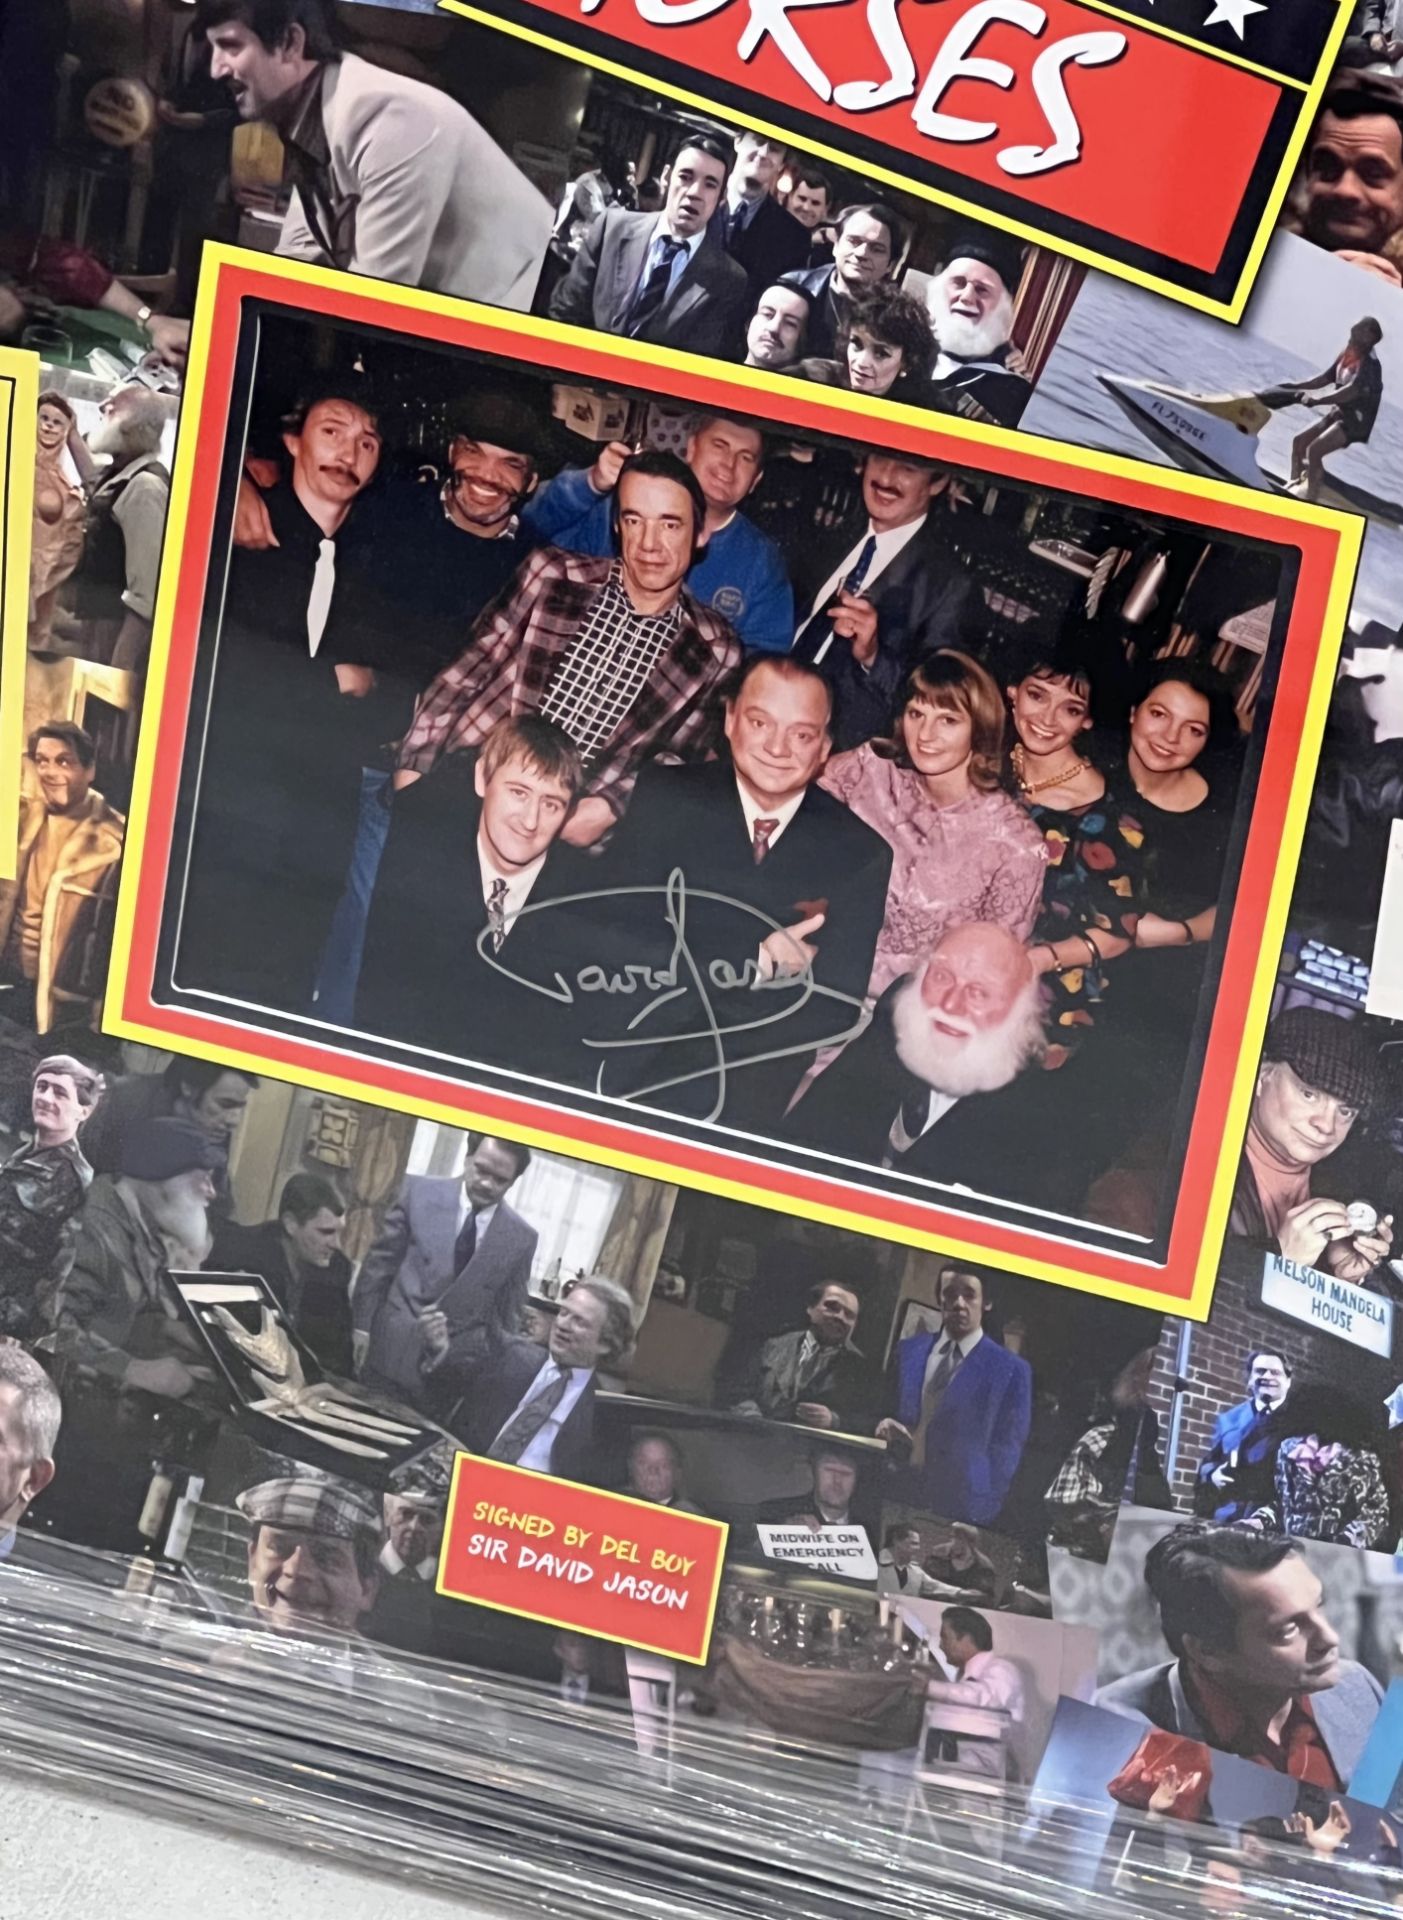 ONLY FOOLS & HORSES PRESENTATION, HAND SIGNED BY â€˜SIR DAVID JASONâ€™ WITH COA - NO VAT! - Image 3 of 6